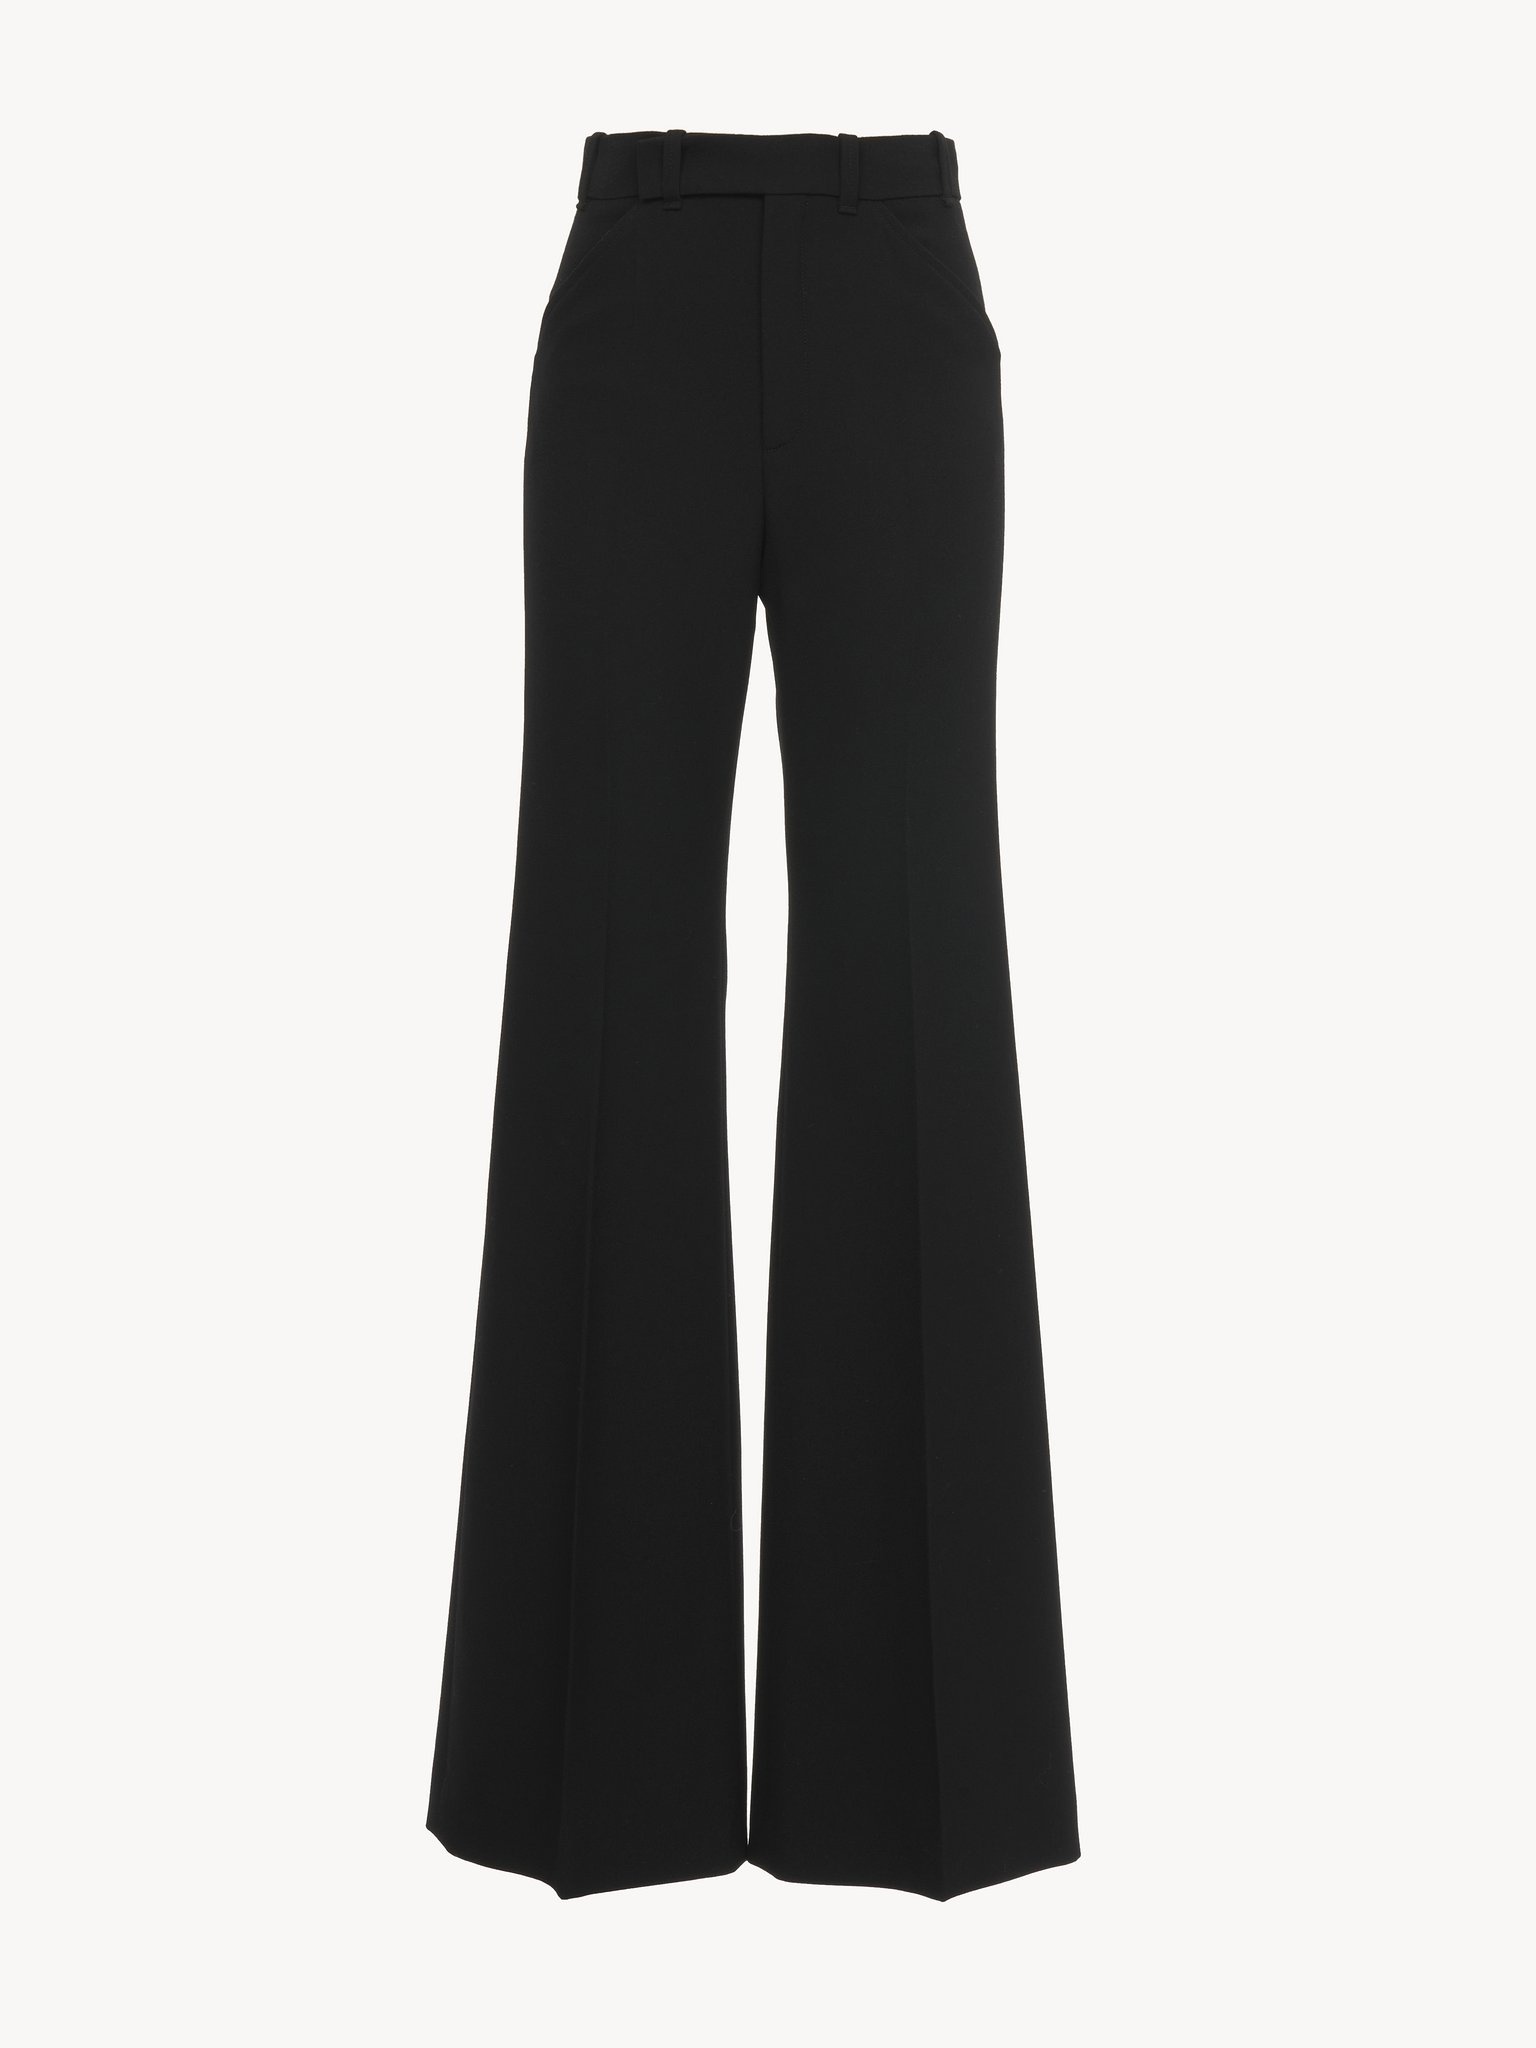 TAILORED PANTS - 3